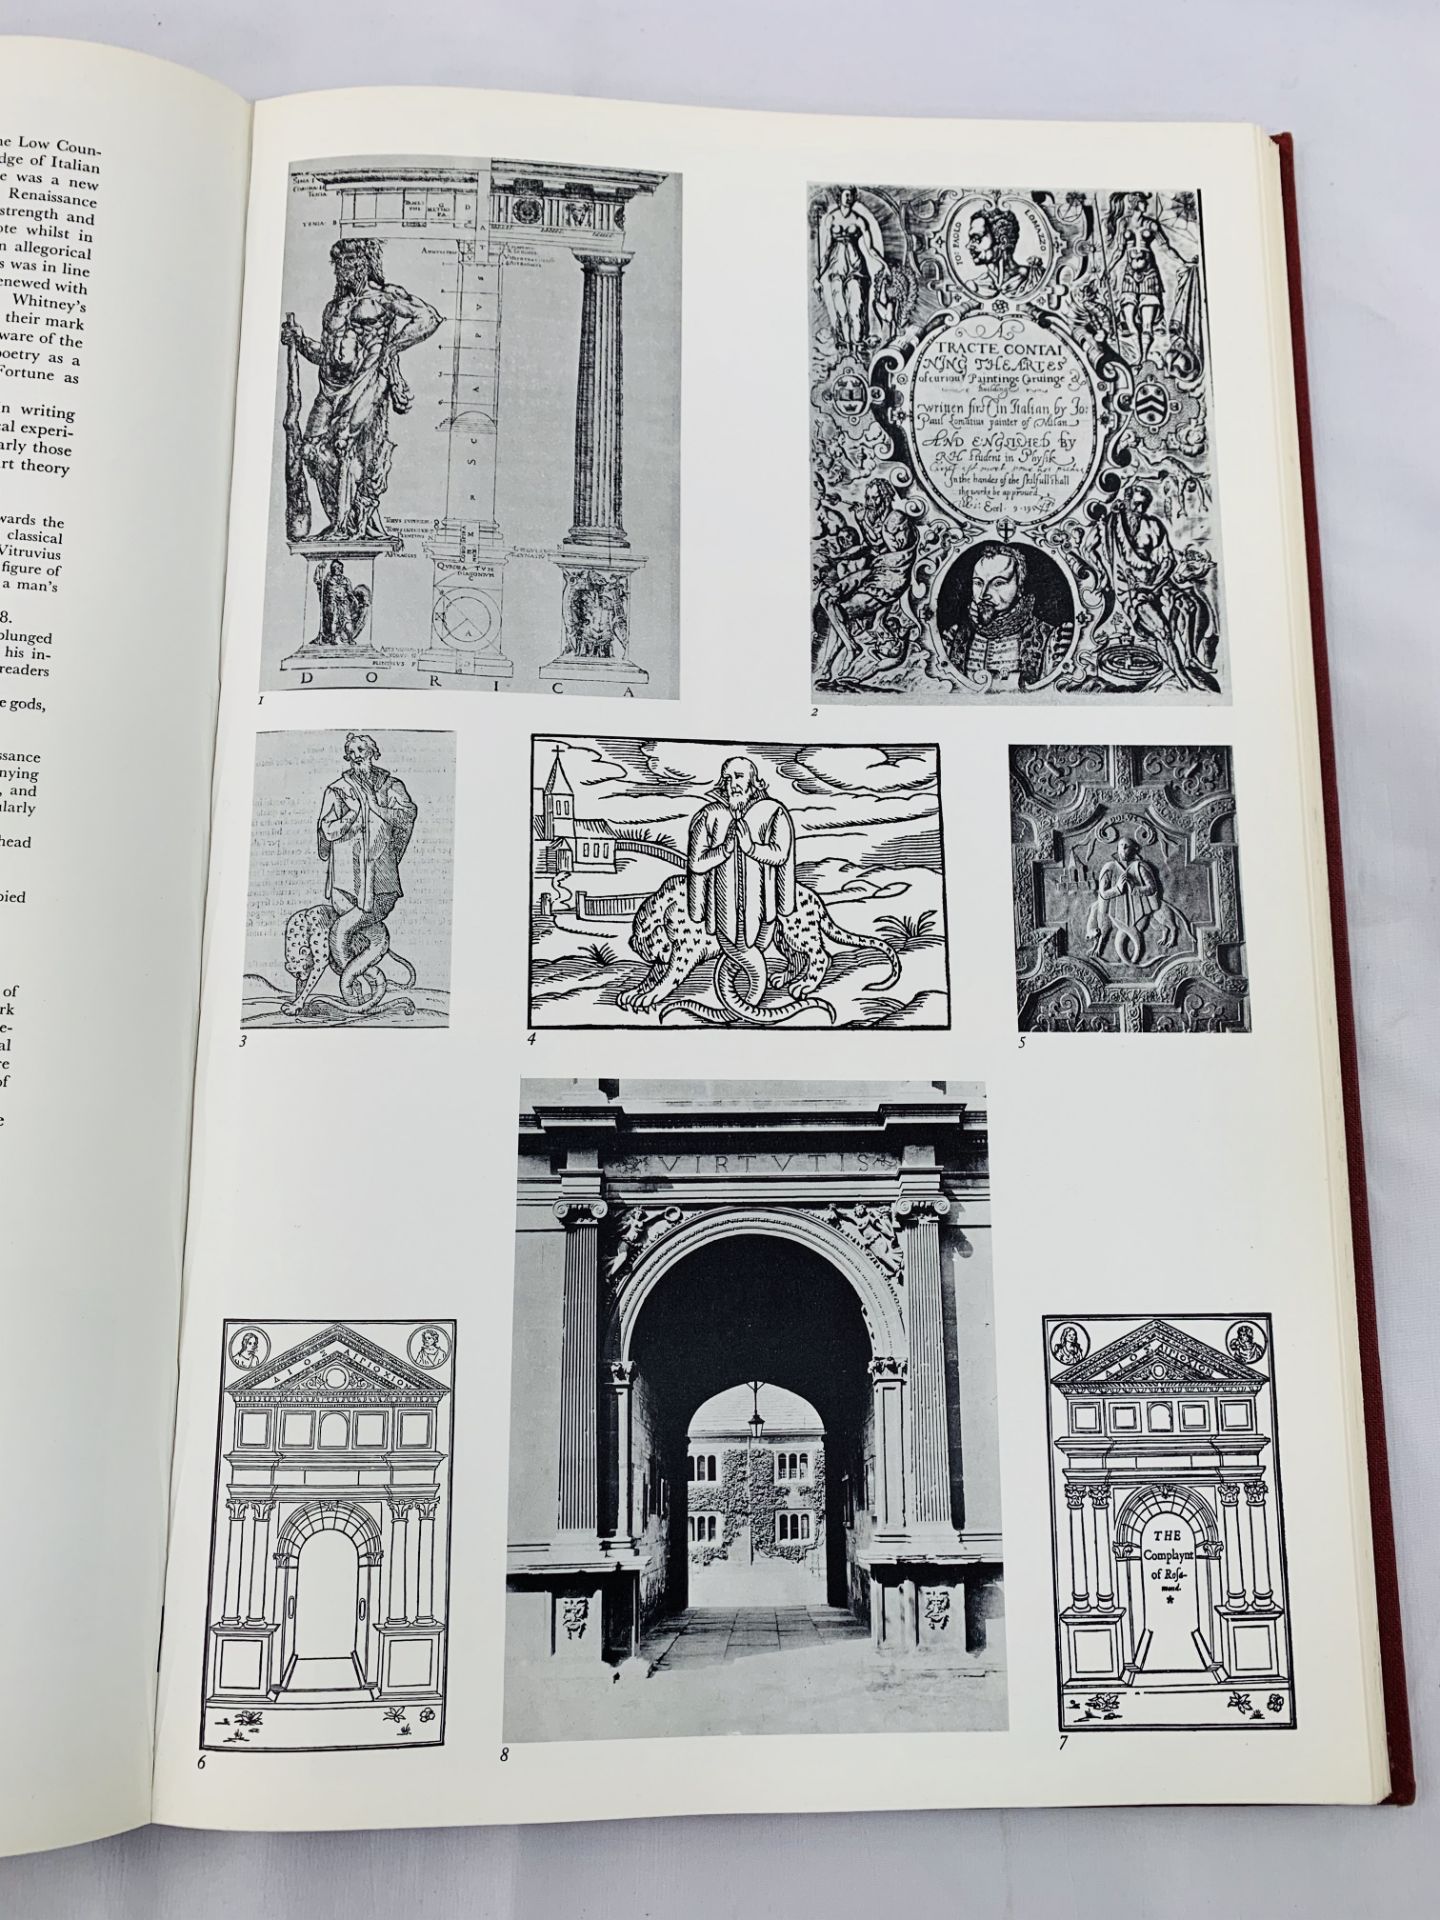 British Art and the Mediterranean, by Saxl and Wittkower - Image 3 of 3